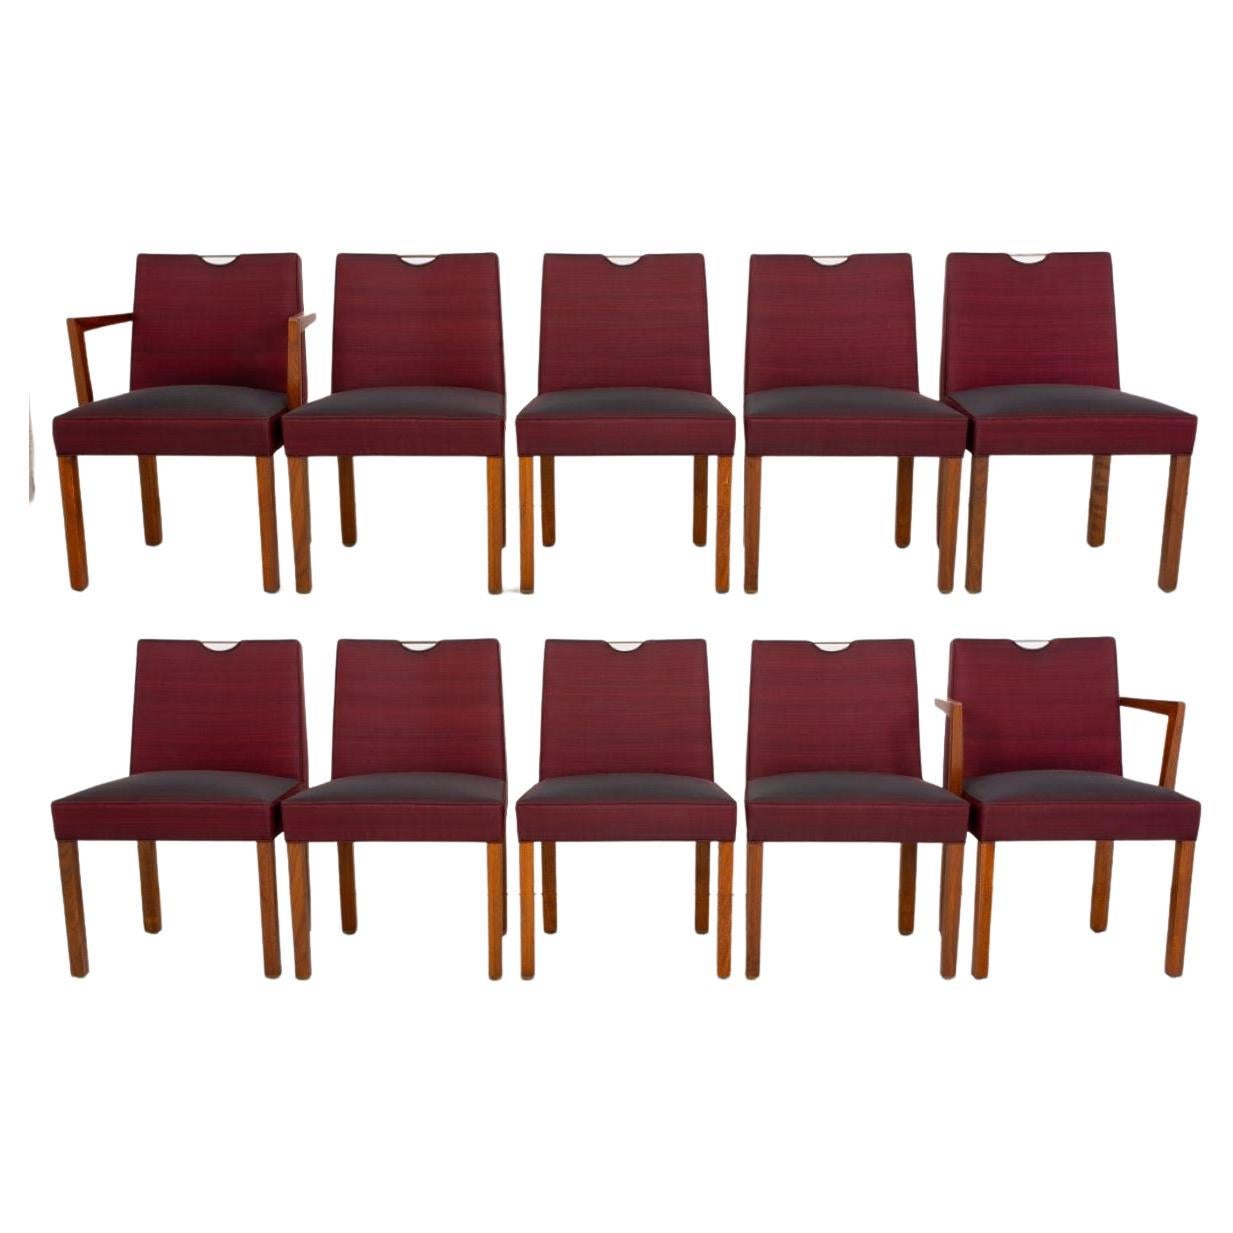 Edward Wormley For Dunbar Model 4592 Chairs, 10 For Sale